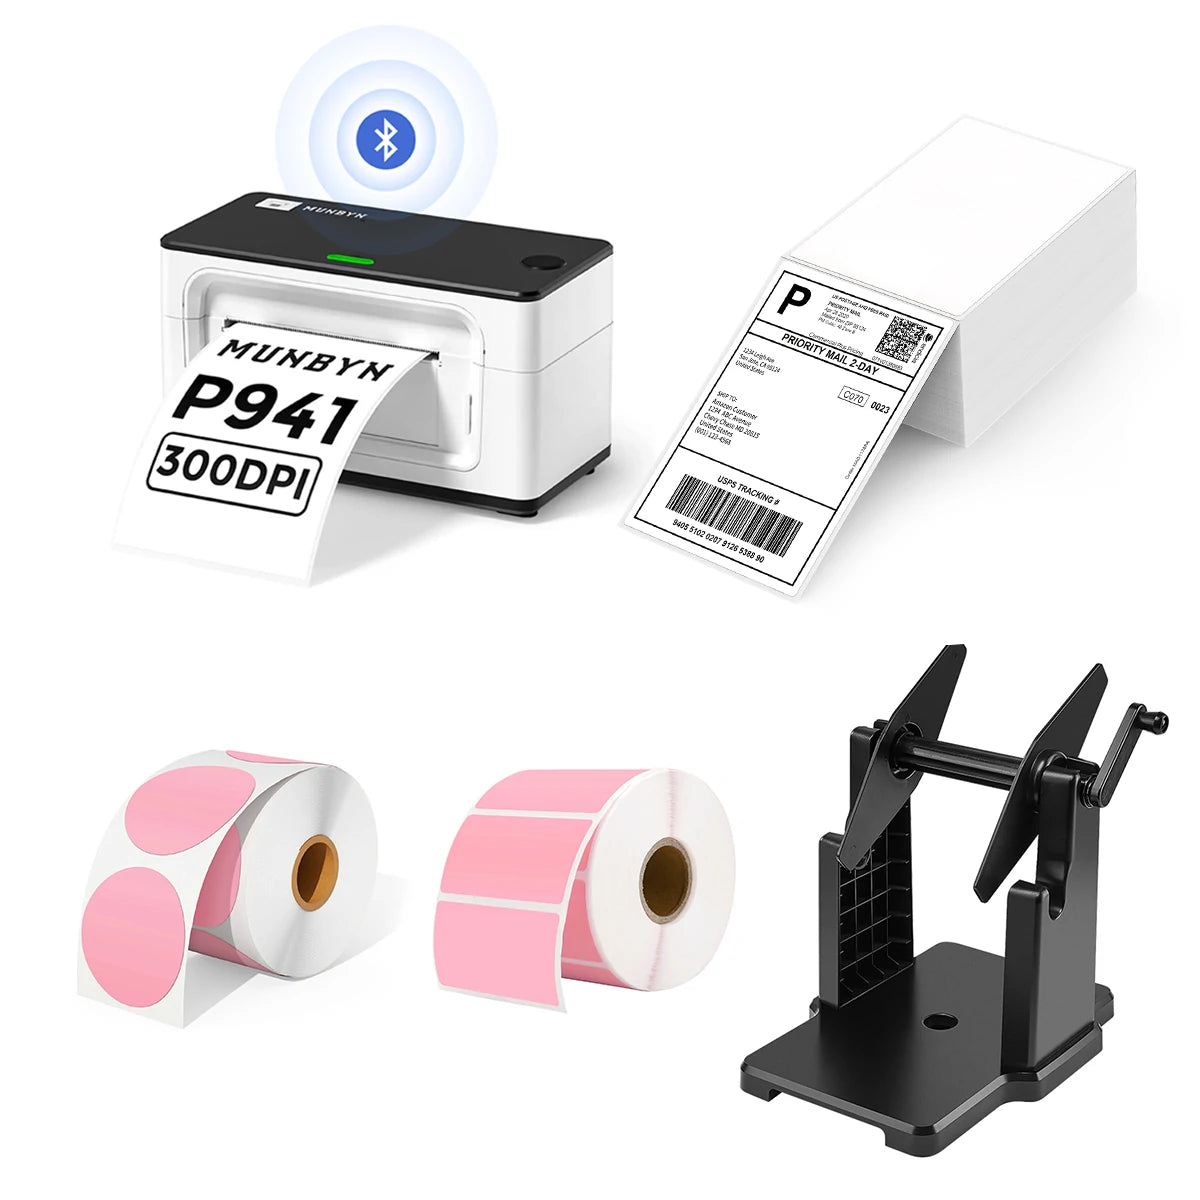 MUNBYN P941B Bluetooth Thermal Label Printer Kit includes a Bluetooth label printer, a label holder, two rolls of pink labels, and a stack of shipping labels.